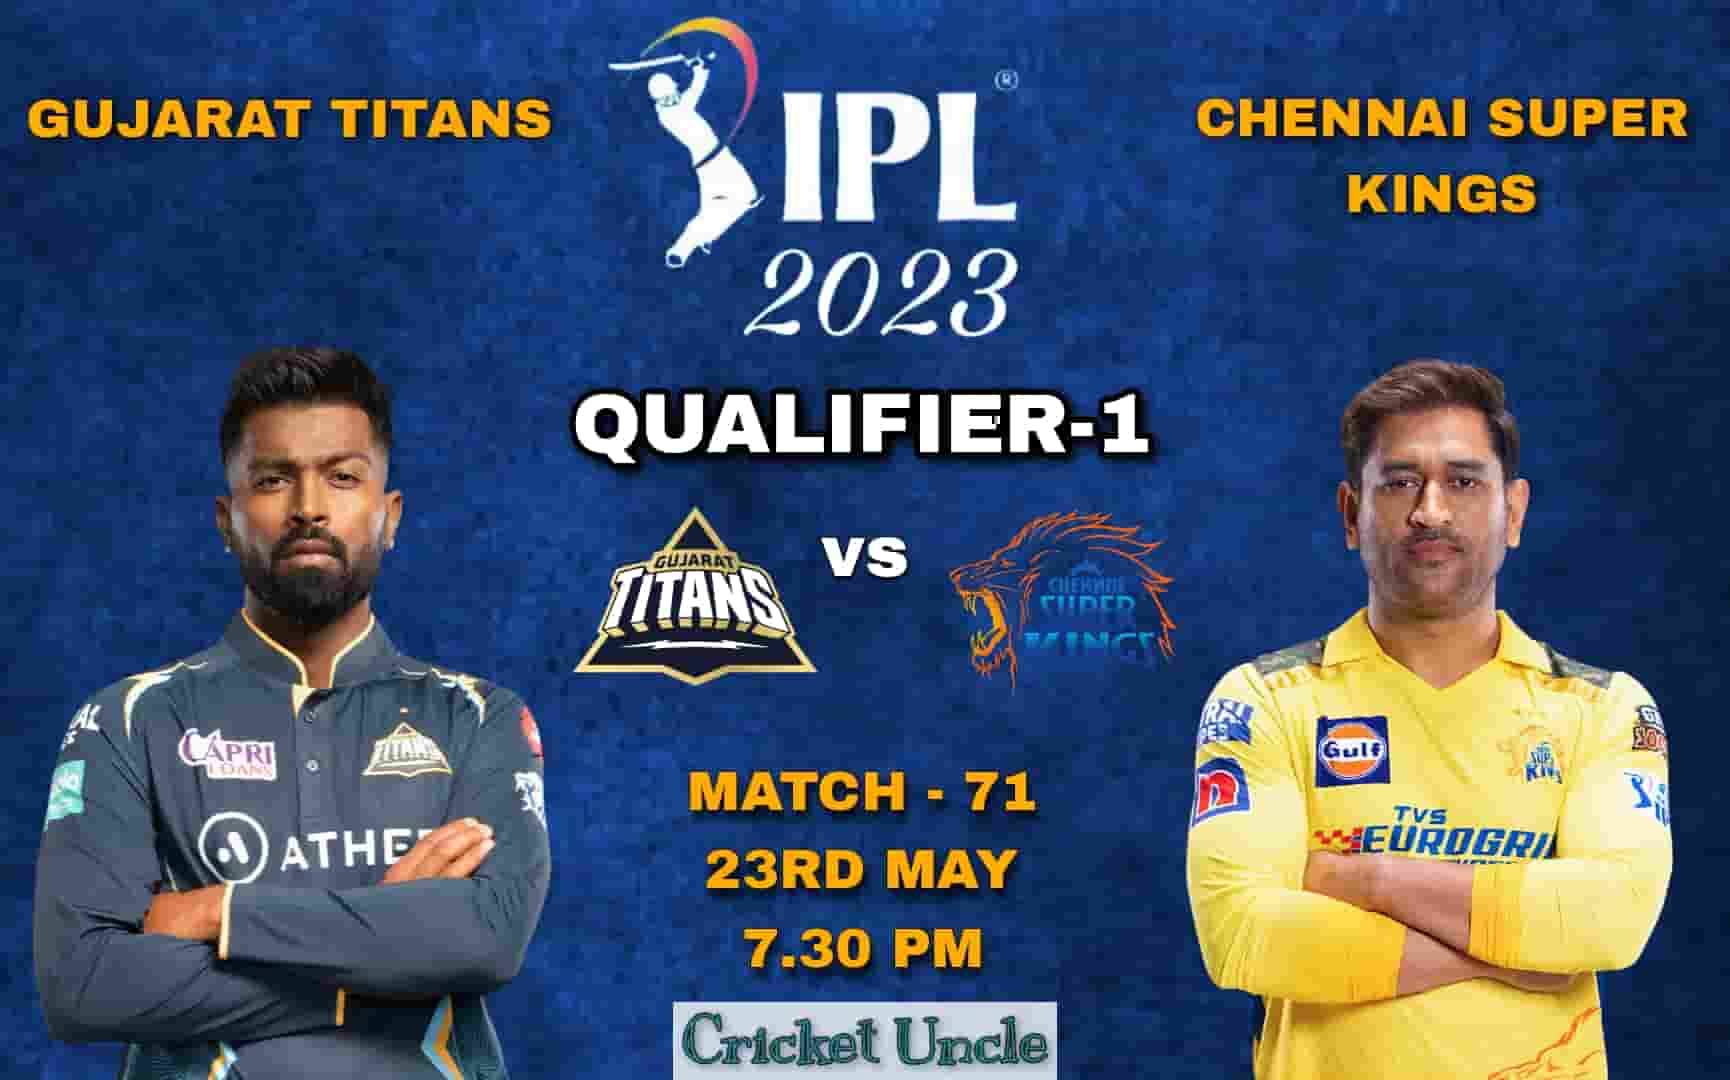 Poster of IPL 2023 Qualifier-1 match -71 prediction between Gujarat Titans and Chennai Super Kings